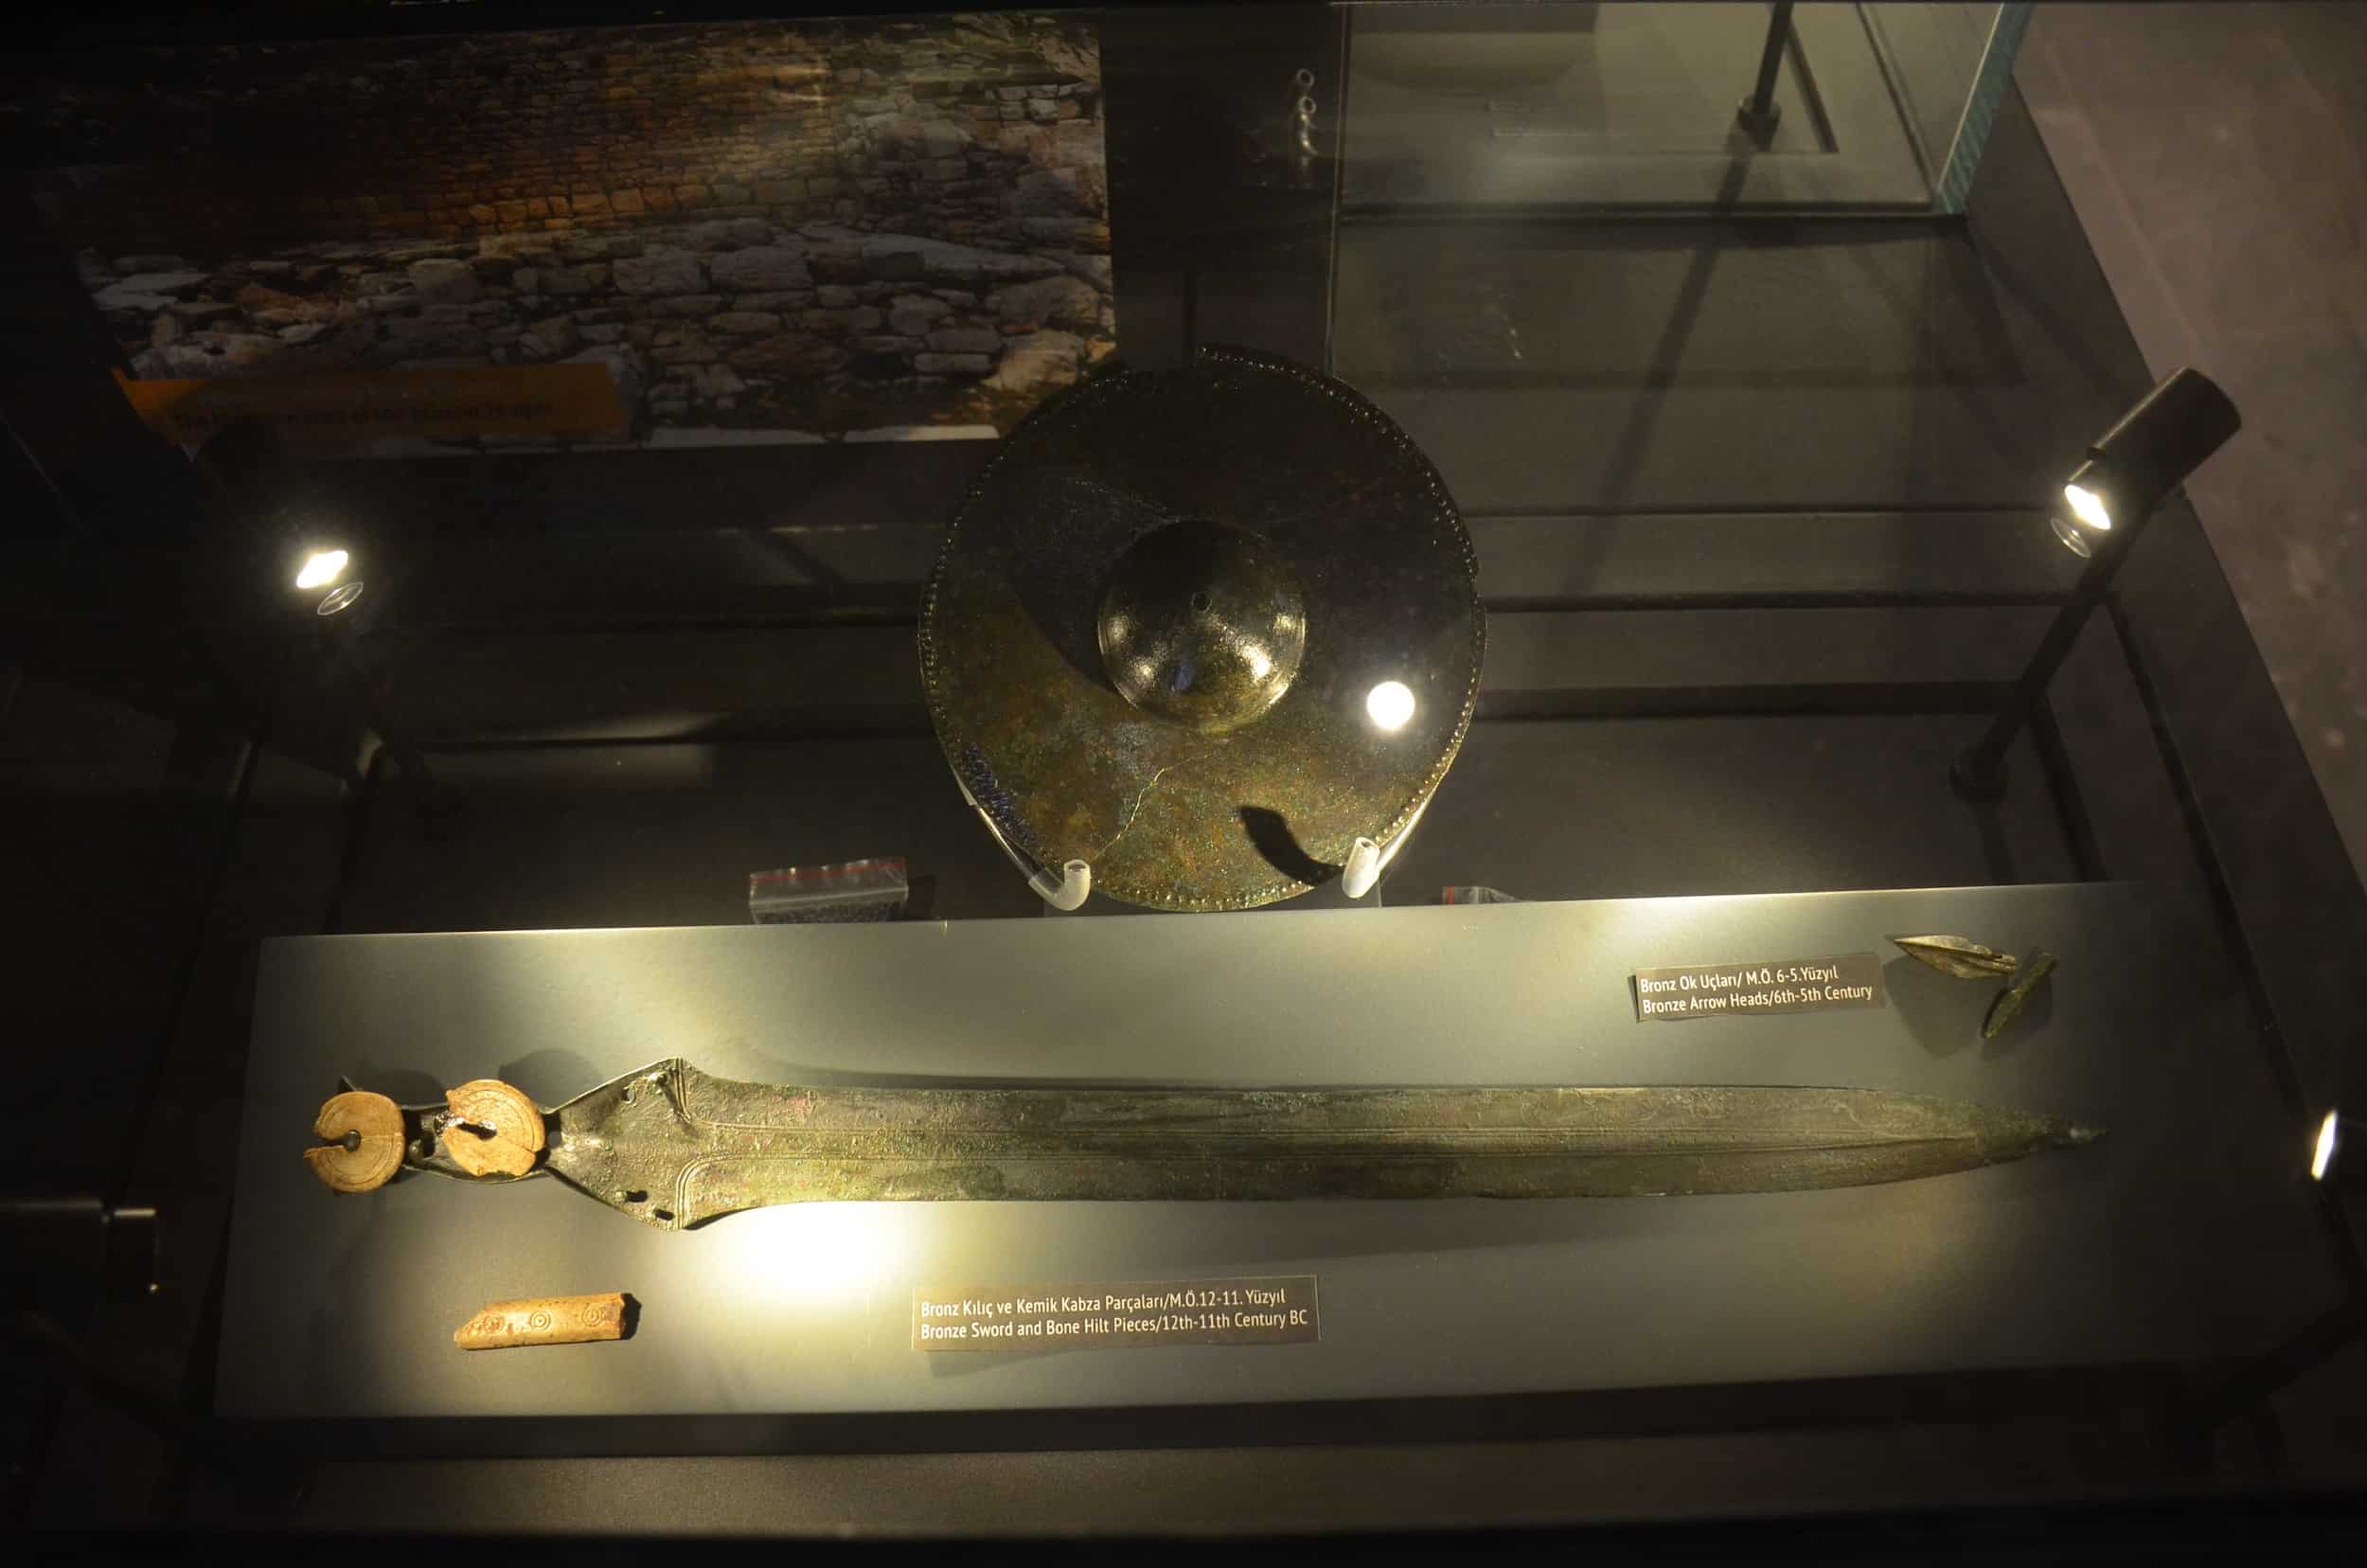 Bronze sword and bone hilt pieces (12th-11th century BC); bronze arrowheads (6th-5th century BC) in the Pedasa Antique City Exhibition at Bodrum Castle in Turkey